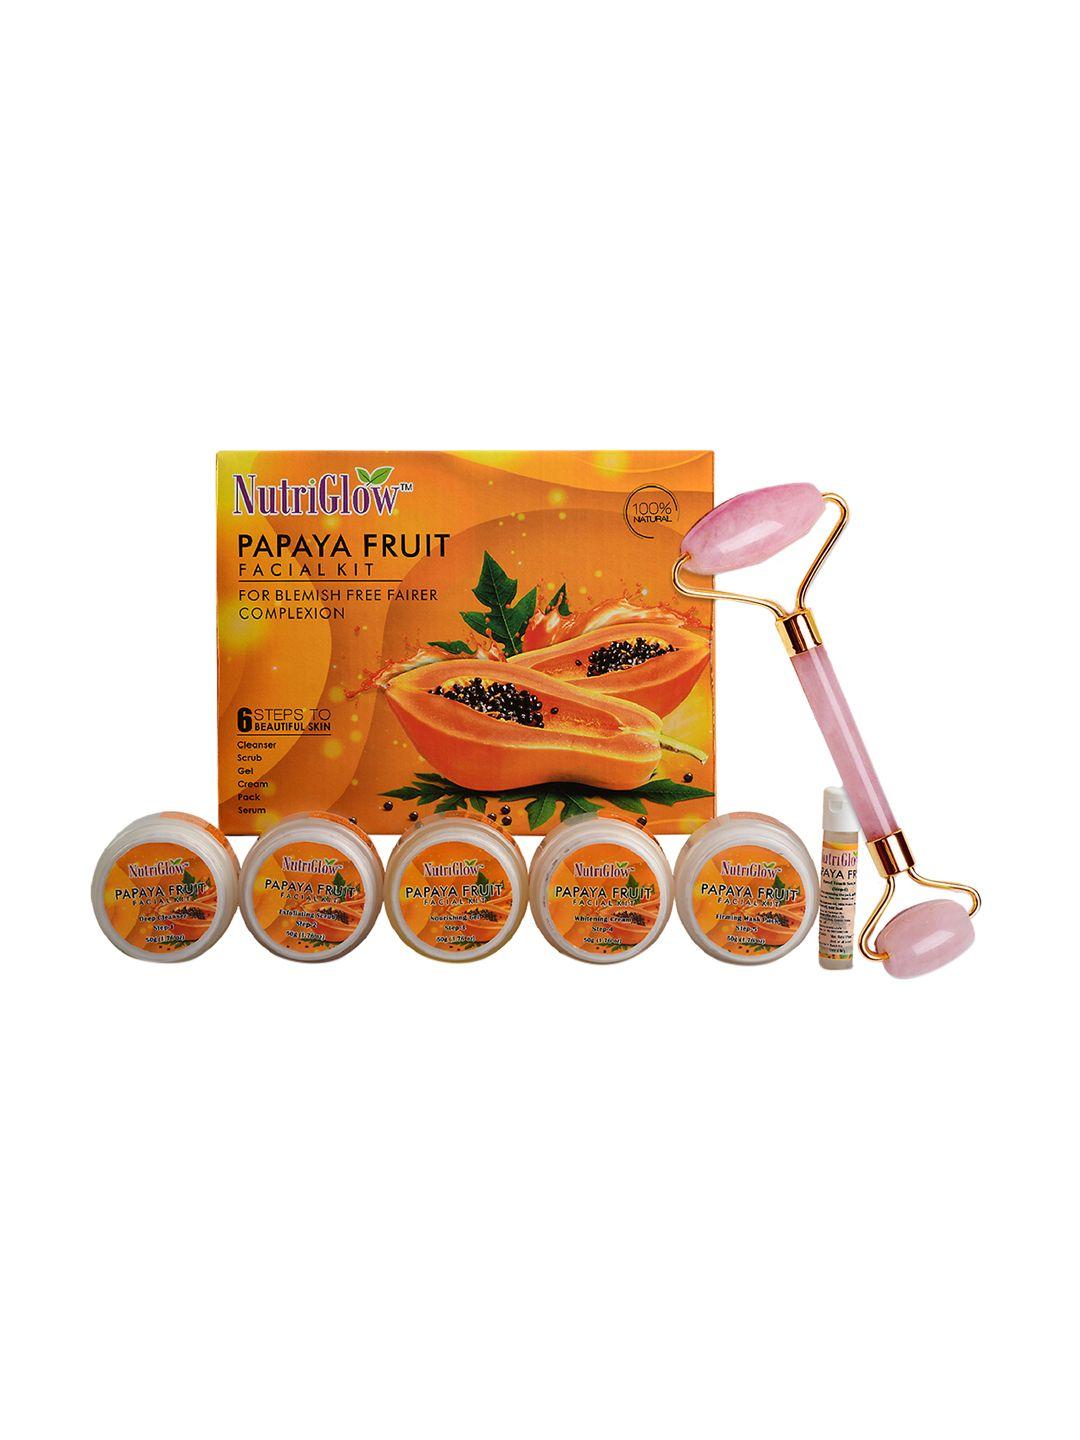 nutriglow-sustainable-sustainable-papaya-facial-kit-for-blemish-free-250g+10ml-with-jade-roller